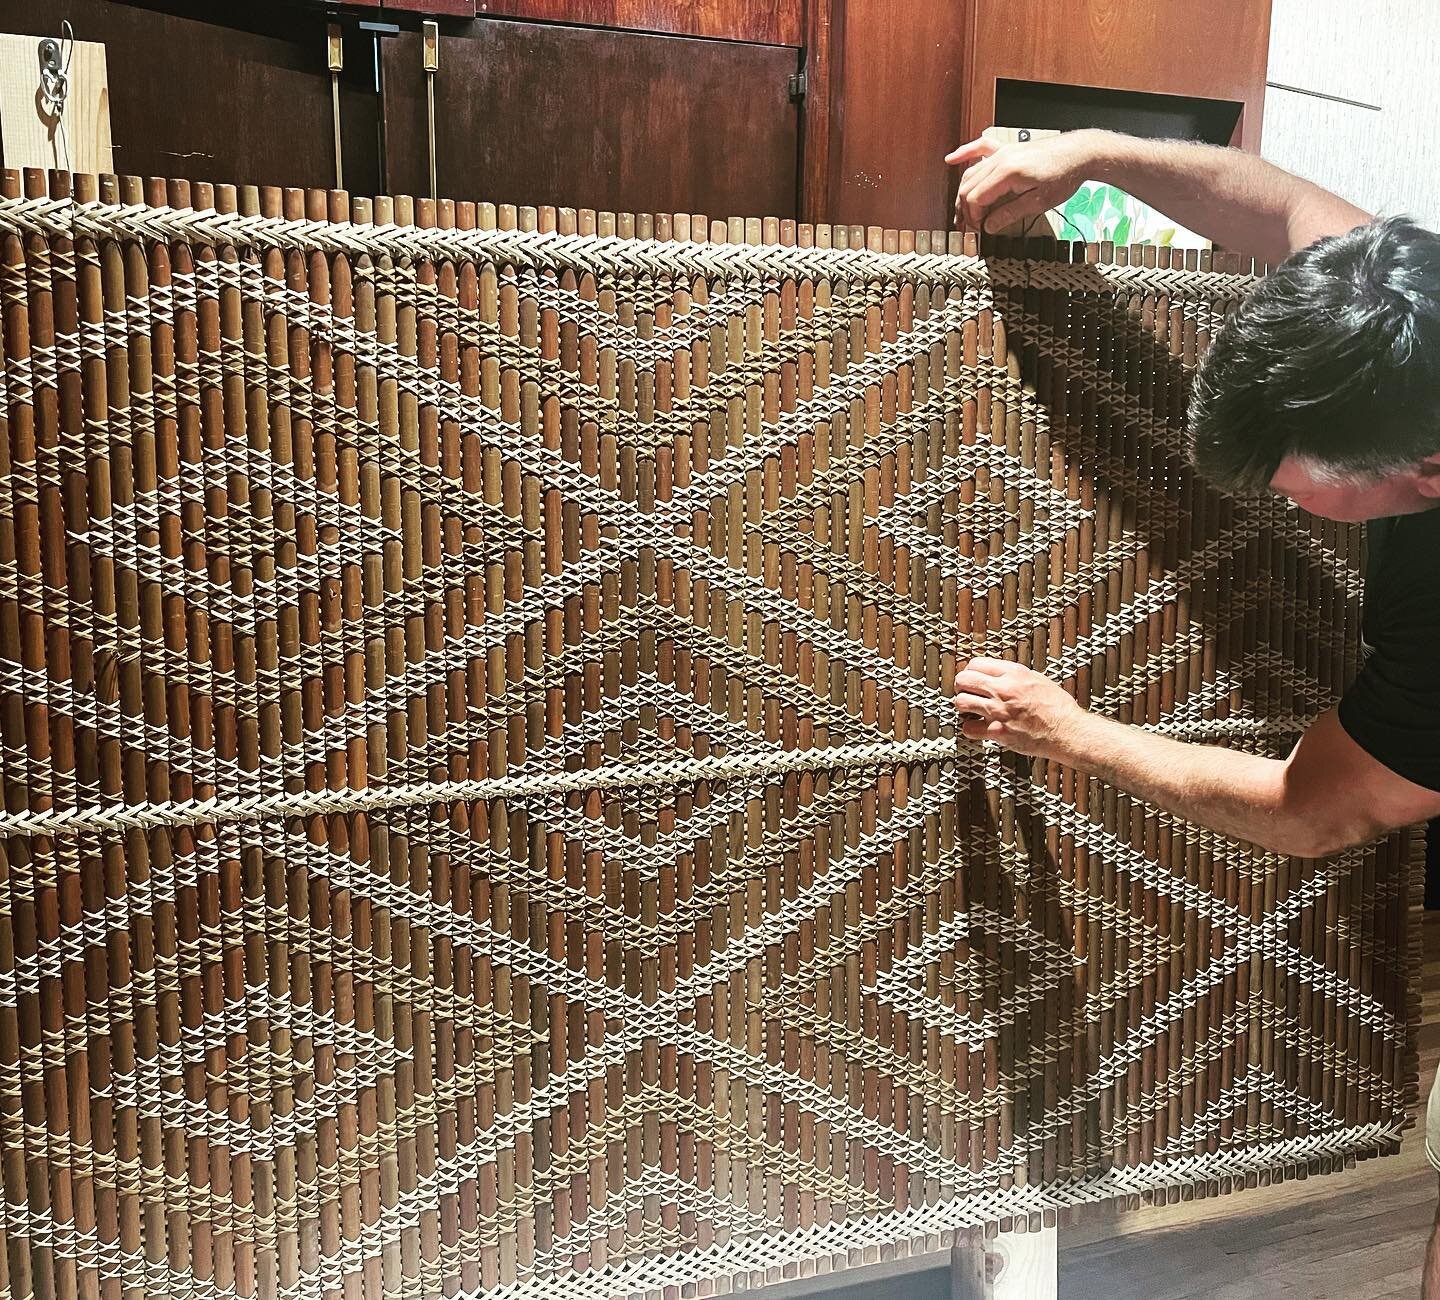 Scott in action repairing and conserving Māori Tukutuku panels. They are part of the original @maunakeahotel collection that we are conserving. They&rsquo;ll be back on display soon with custom frames by @wilkinsonwoodworkshawaii #arthandlinghawaii #